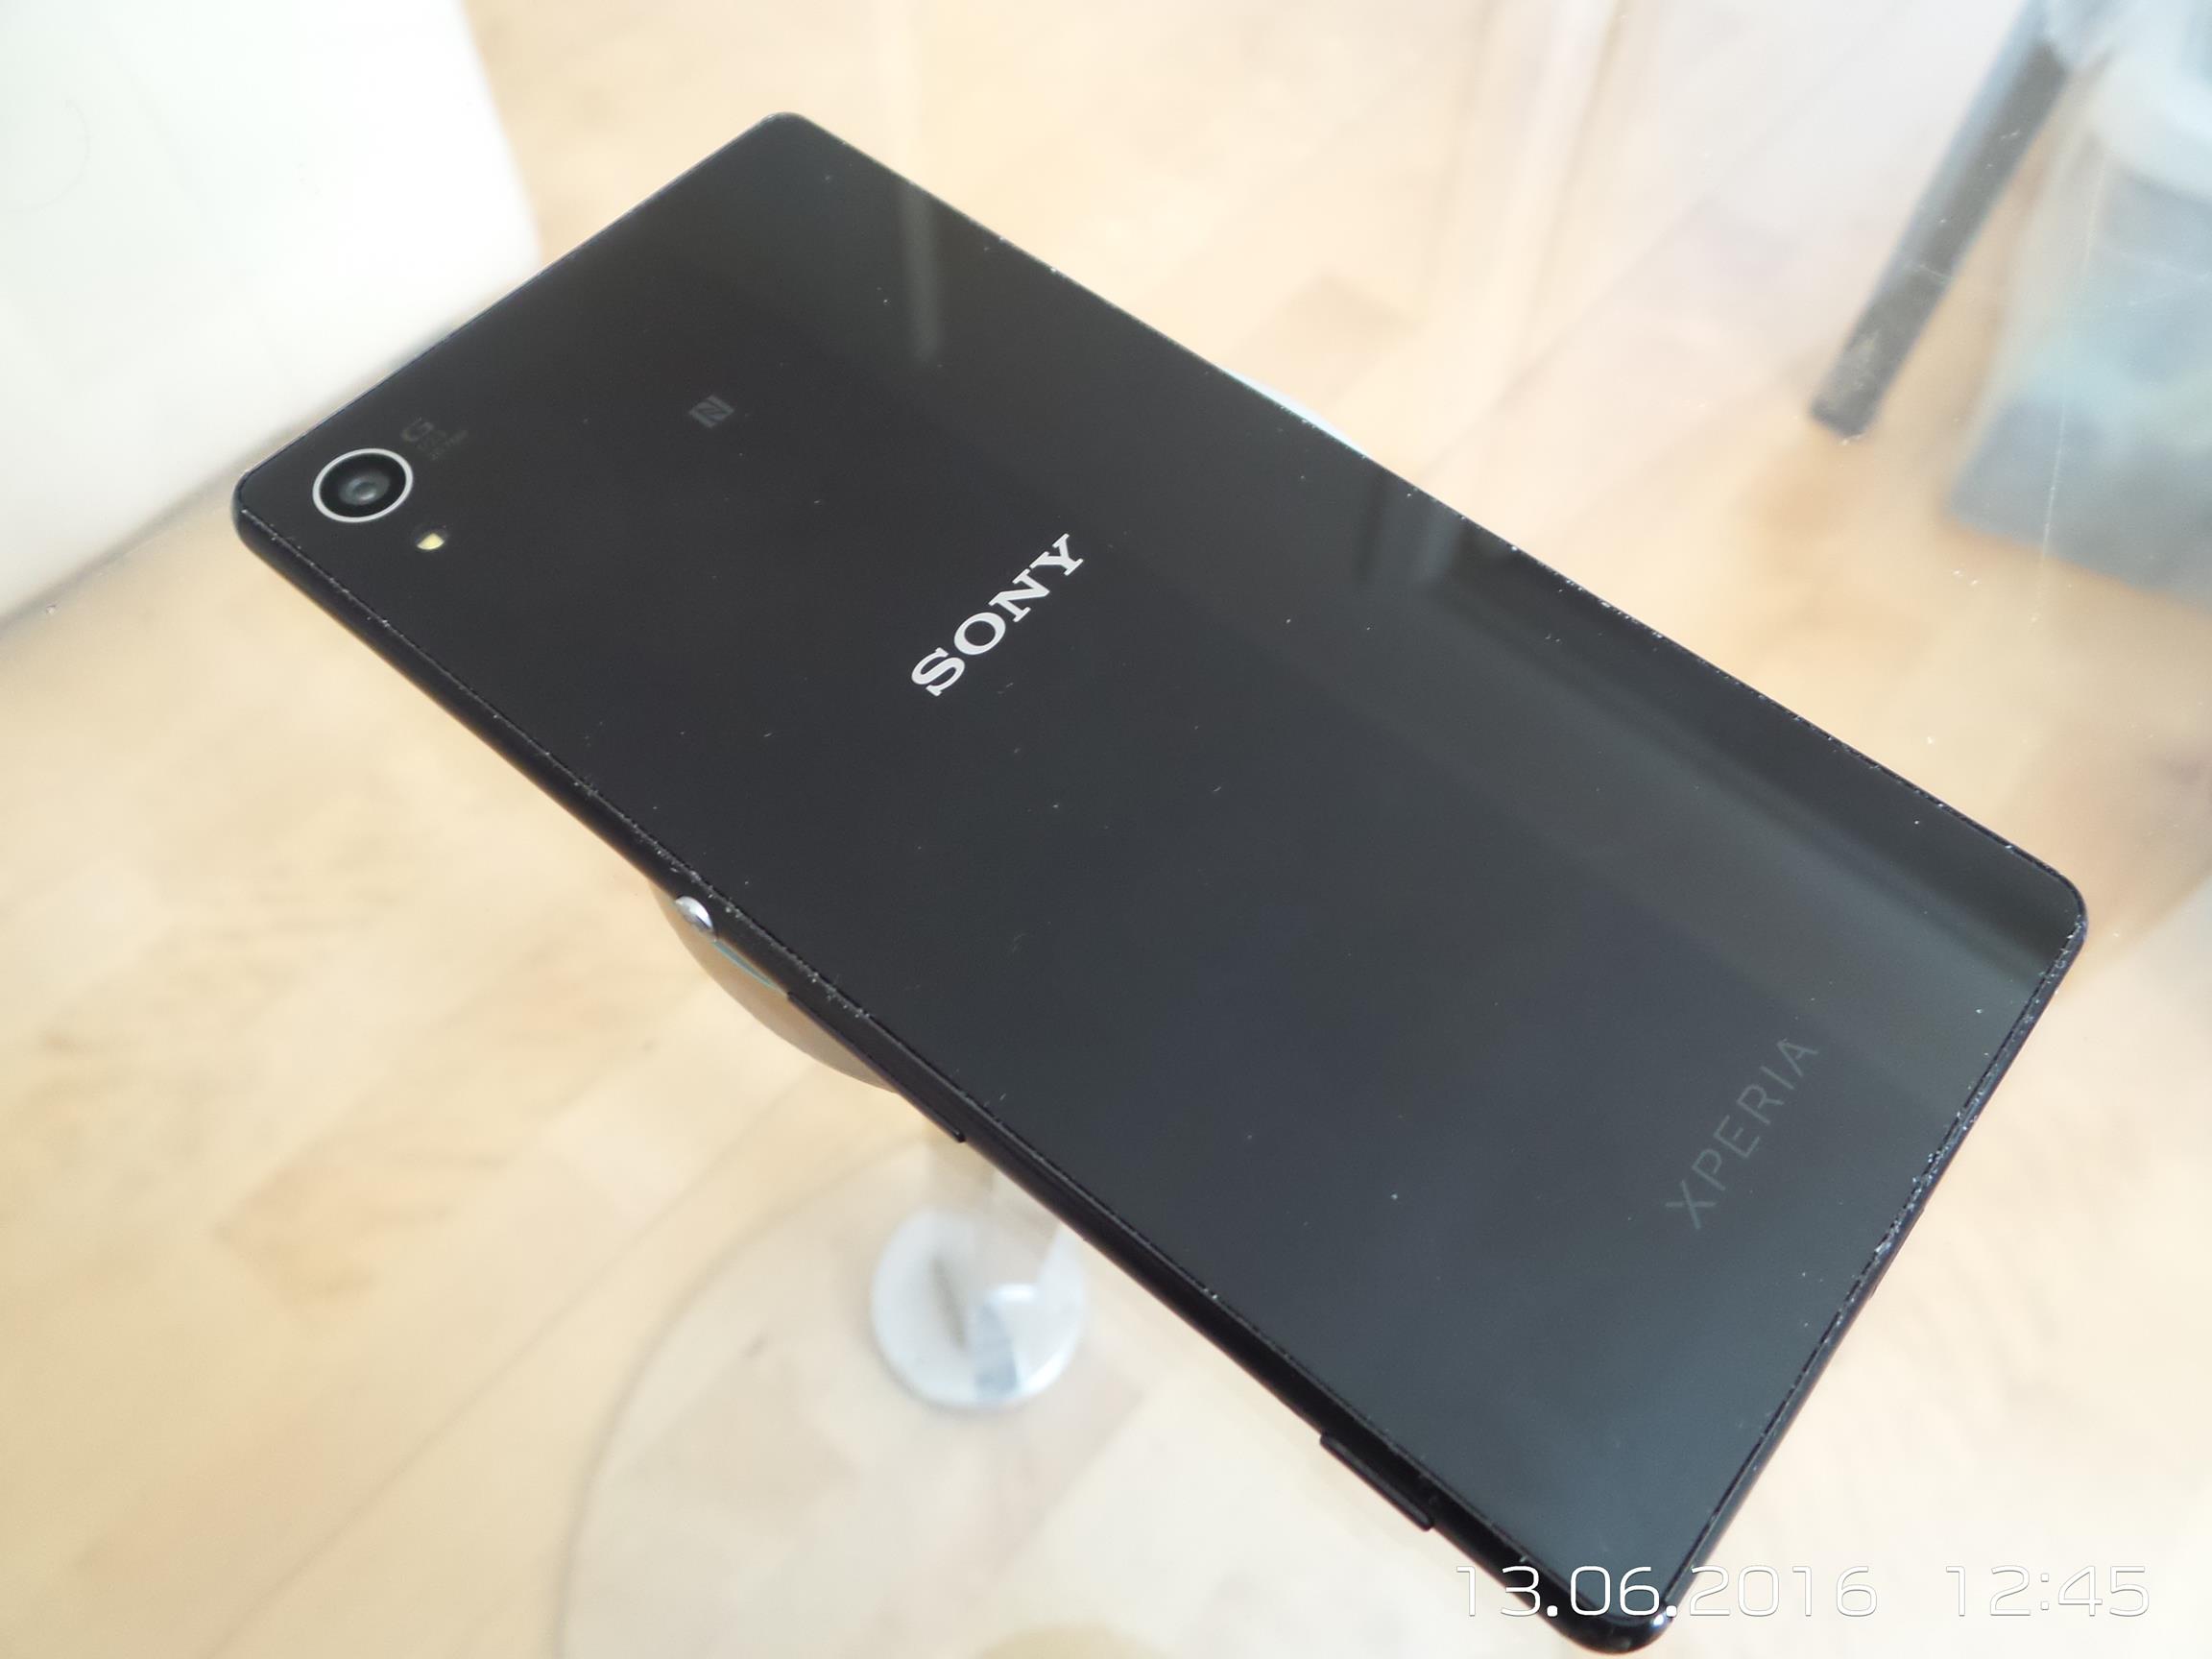 Sony Xperia Z3+ Quick Review by mark2410